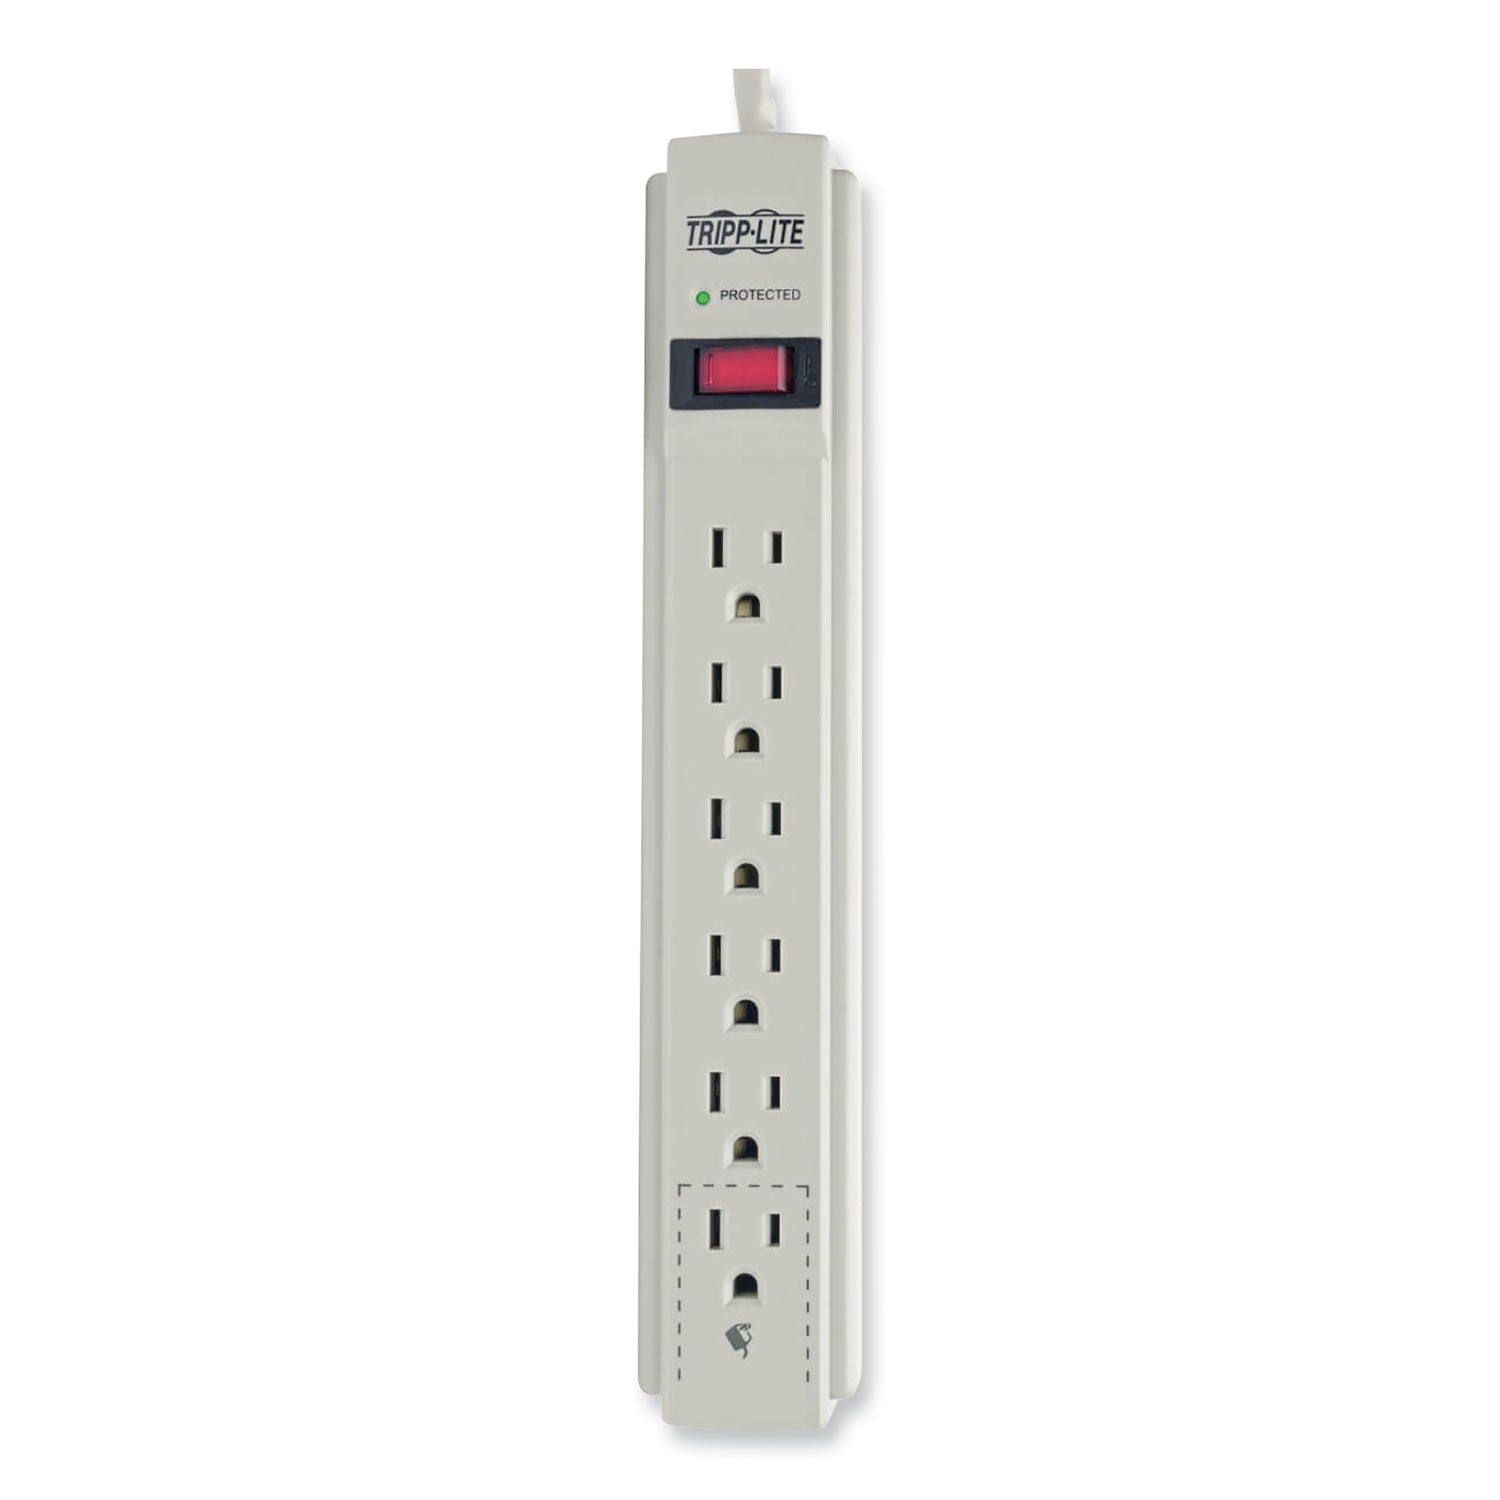 Protect It! Surge Protector, 6 AC Outlets, 15 ft Cord, 790 J, Light Gray - 